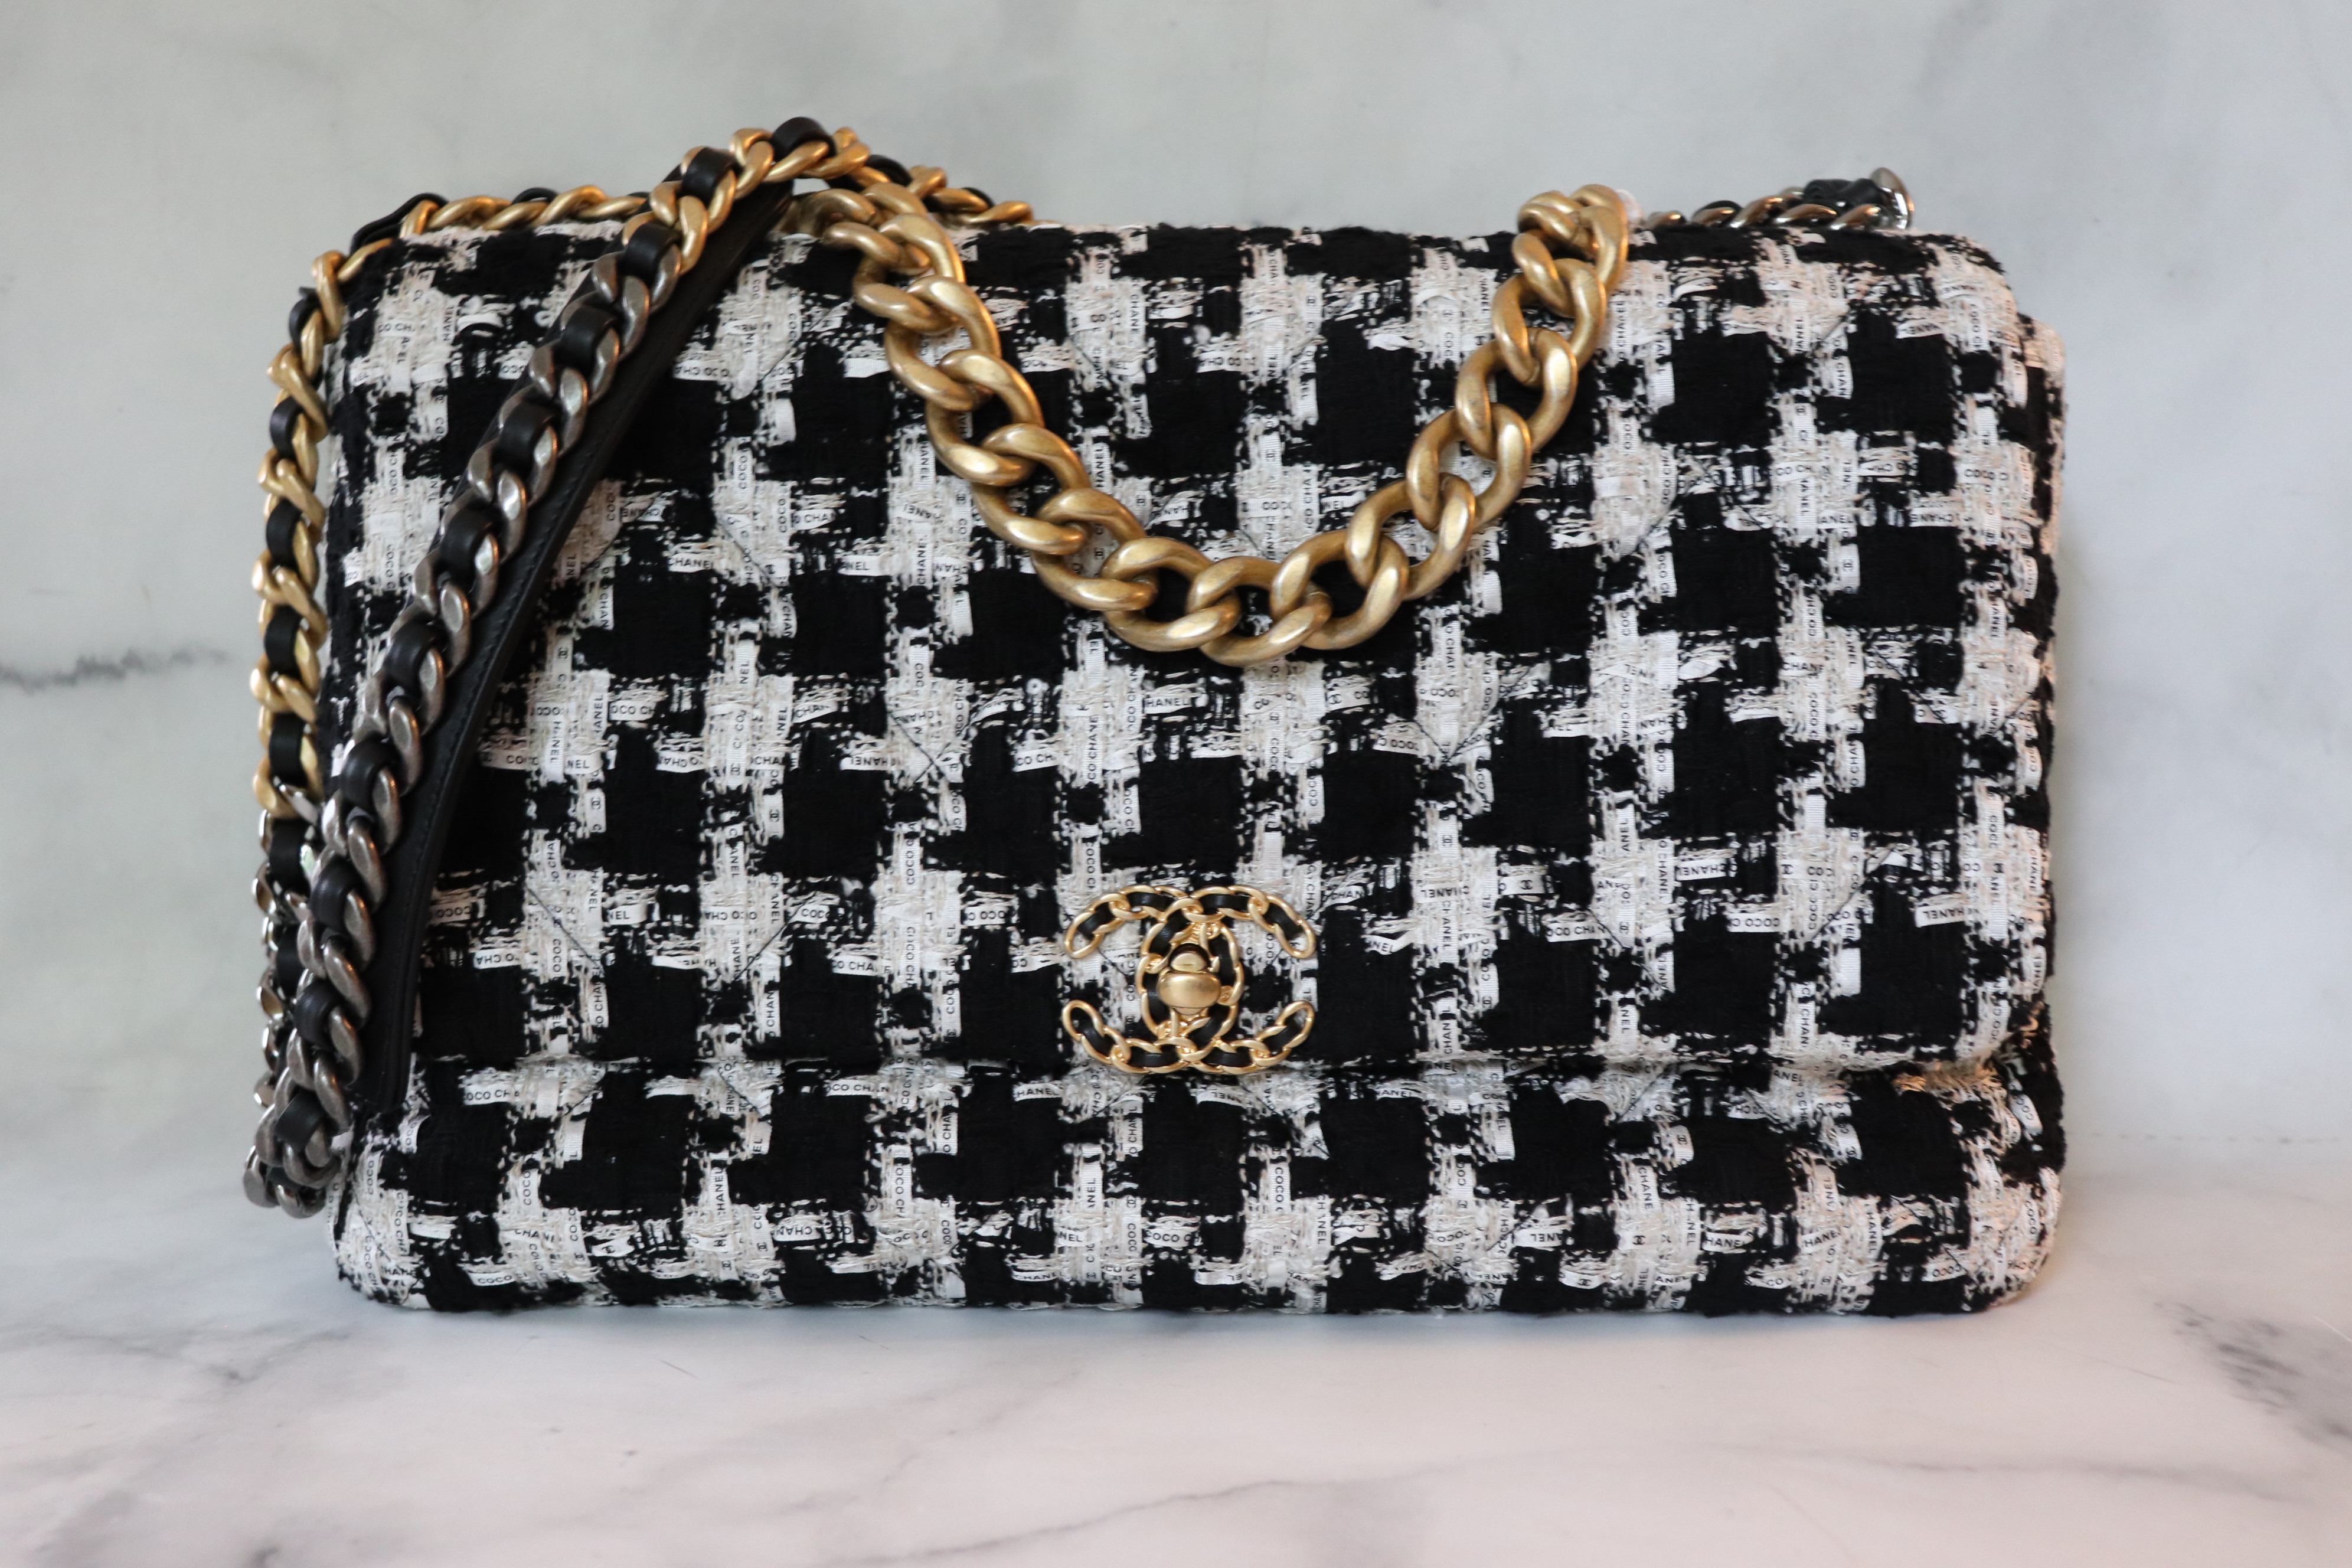 Chanel 19 Houndstooth Navy White Large Flap bag - AWC1406 – LuxuryPromise